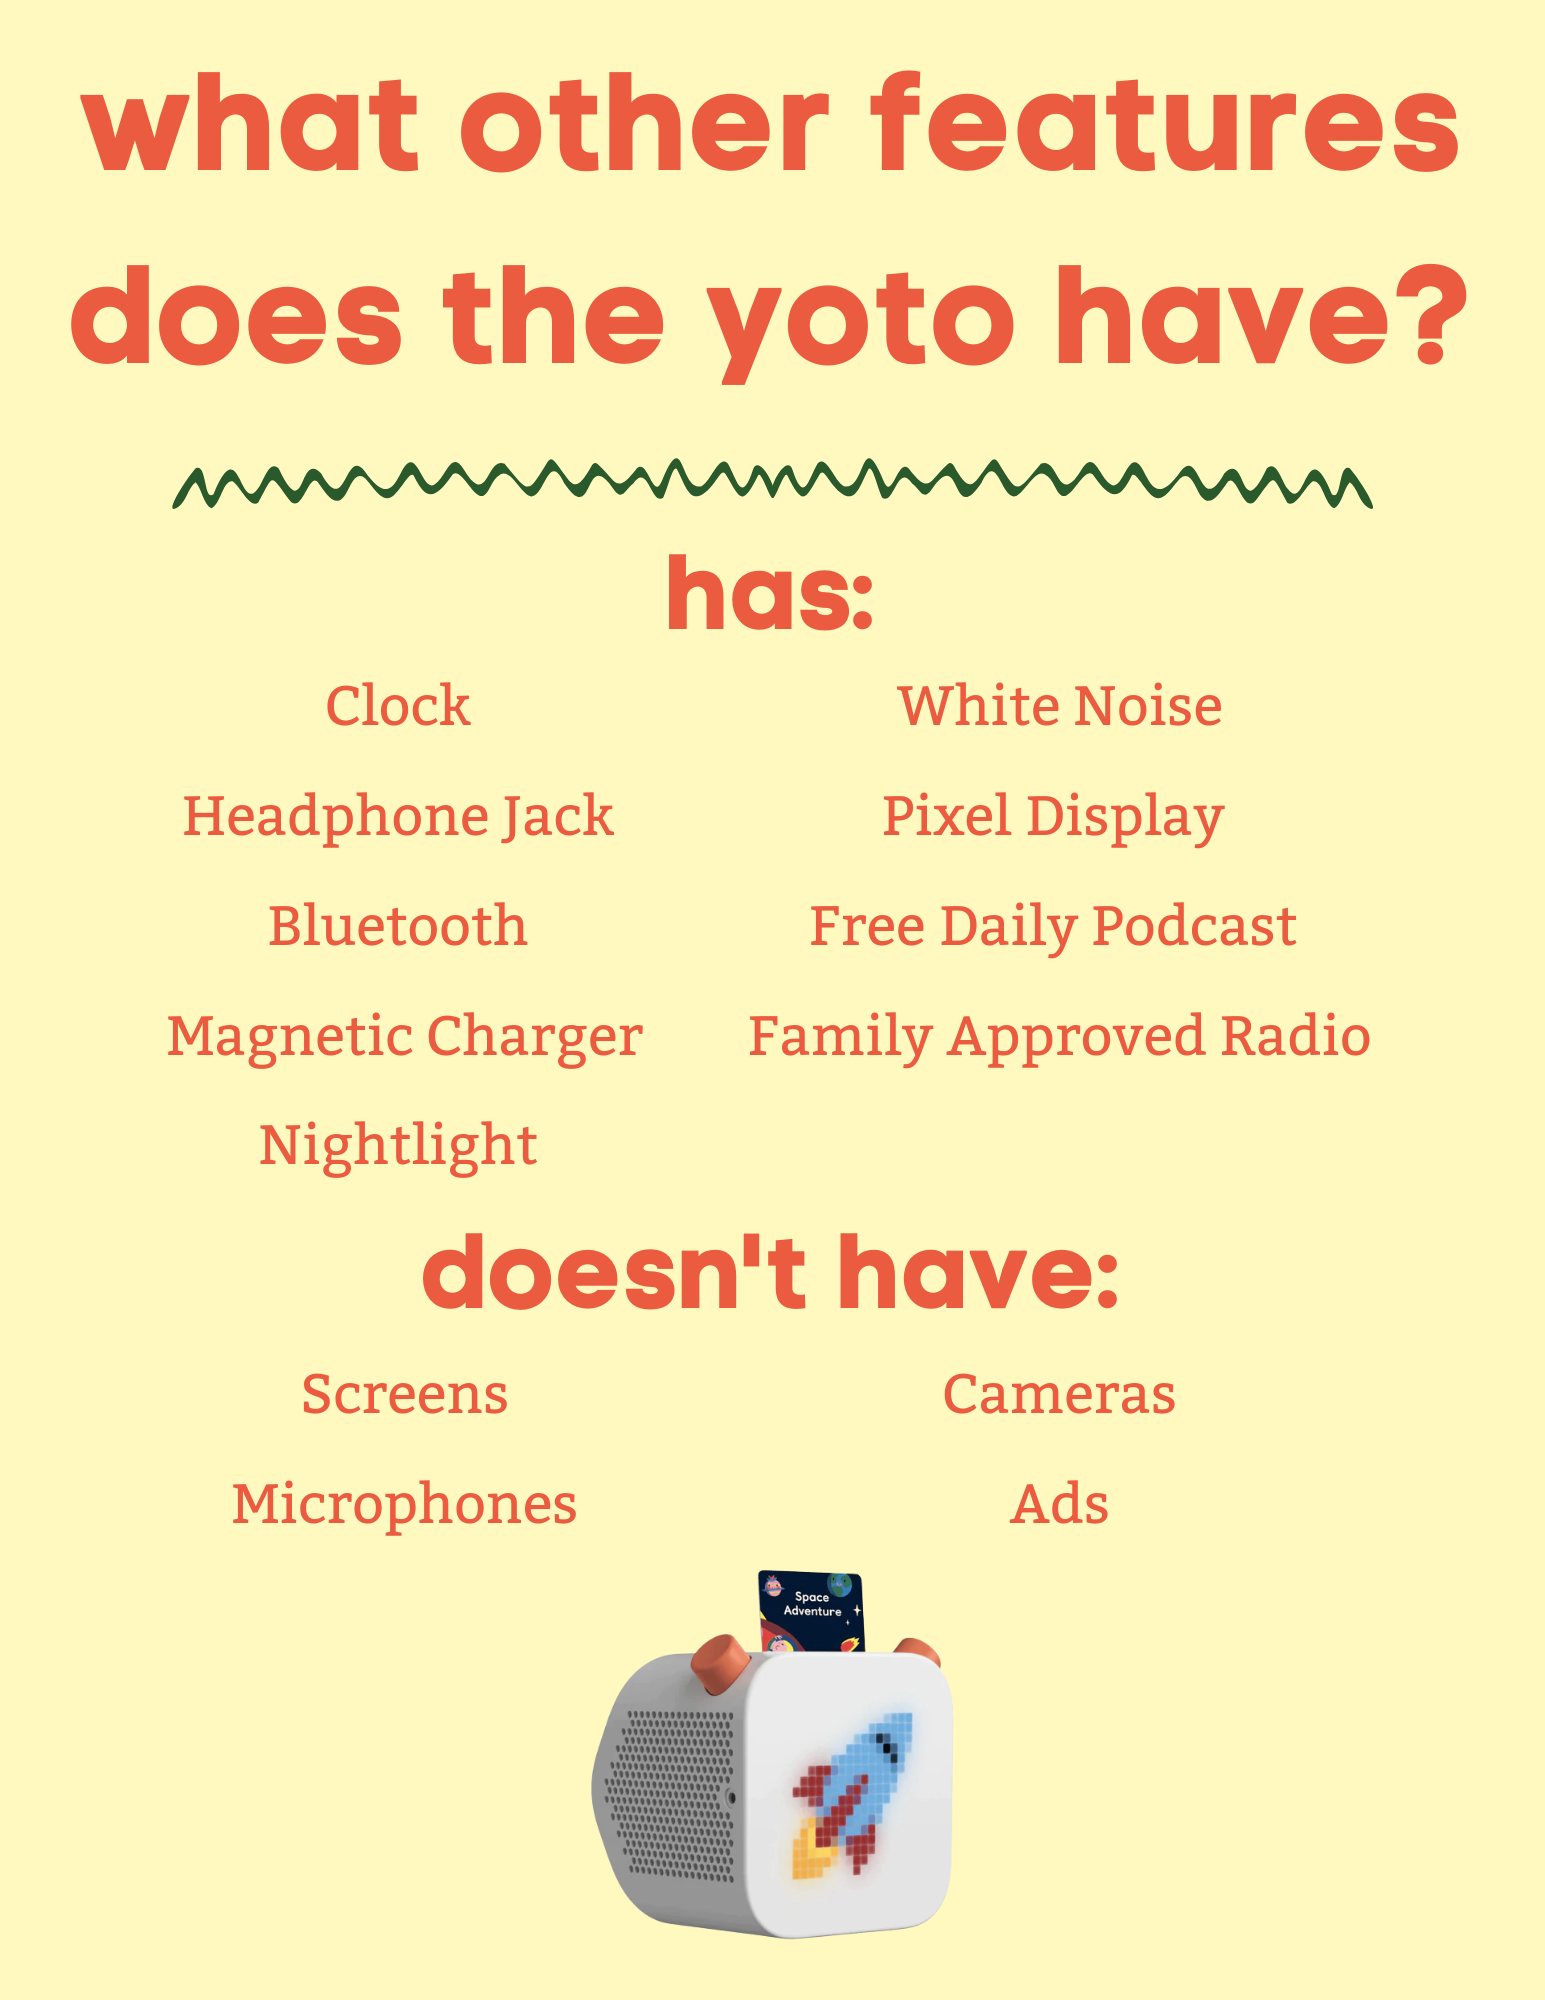 The Yoto can do more than just play audio books. It has a nightlight, can play white noise, and has access to a family friendly radio station.  Yoto's don't have screens, microphones, or ads. 